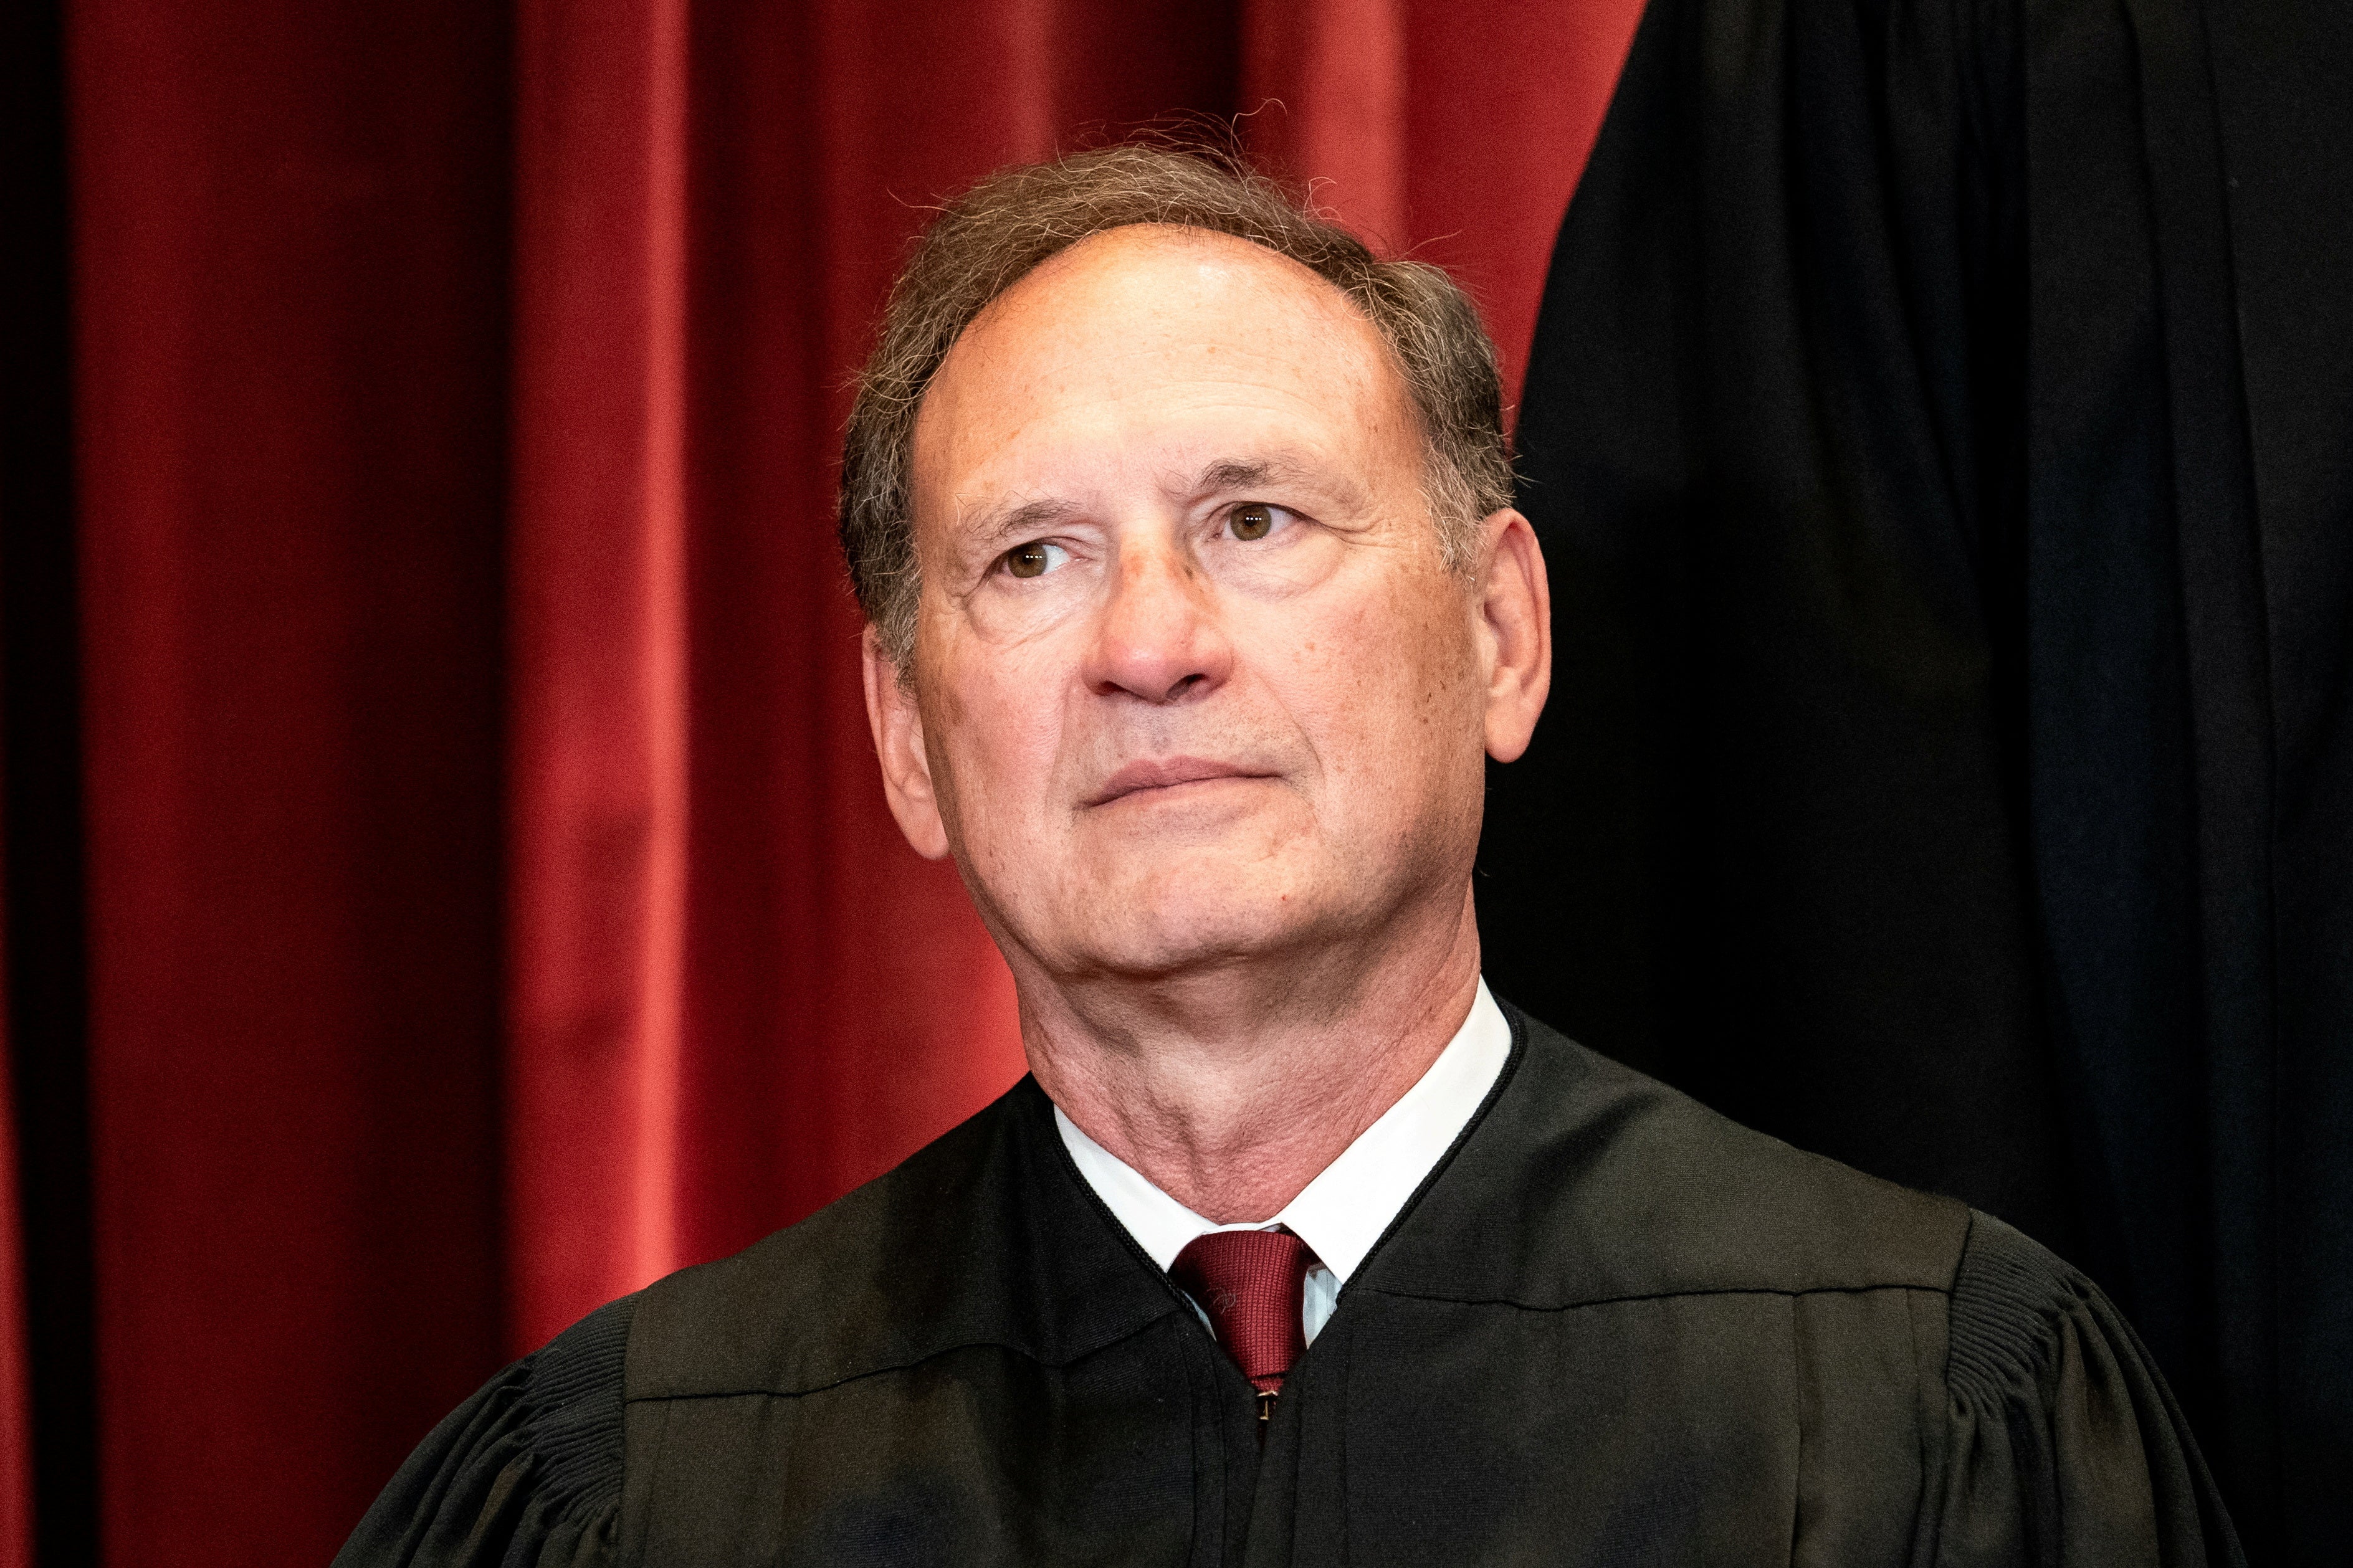 Supreme Court Justice Samuel Alito is in the Democrats’ firing line once again